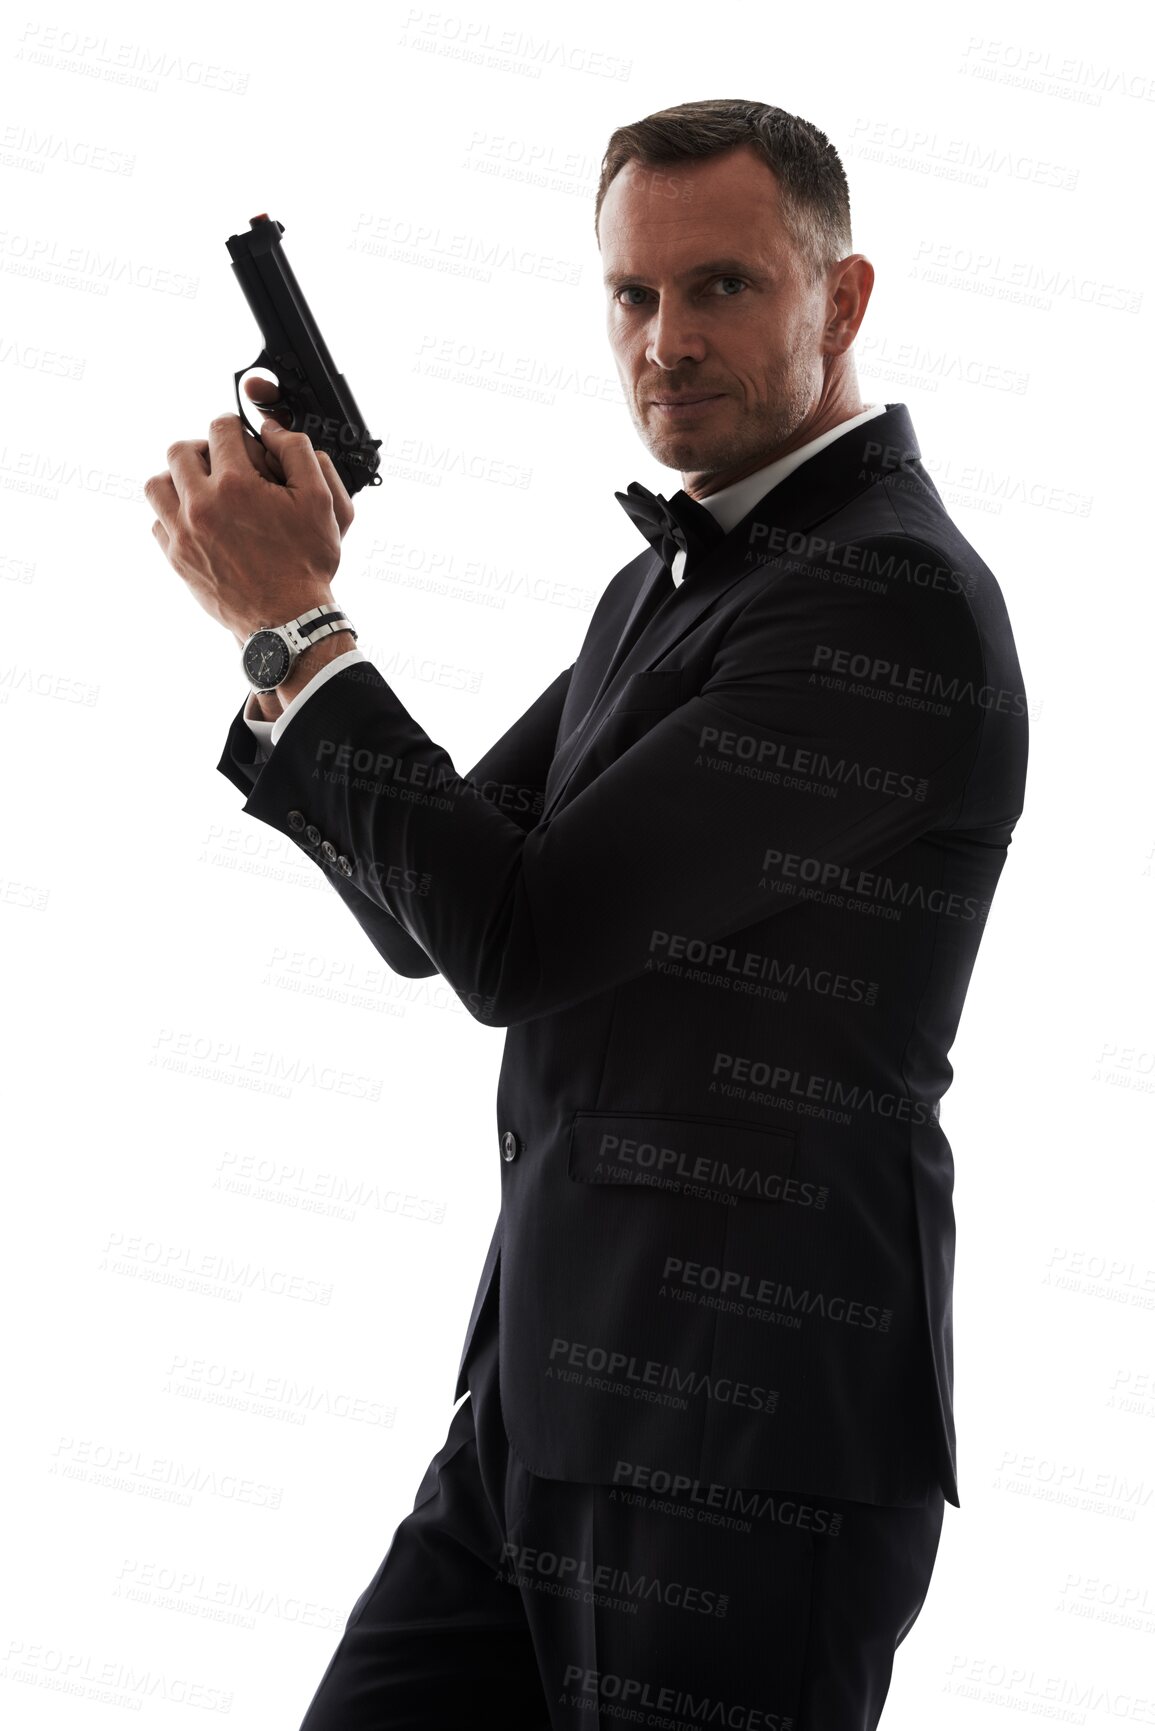 Buy stock photo Portrait, secret agent and man with gun isolated on transparent, png background for business, action movie or security. Detective, investigation and professional person or bodyguard with firearm